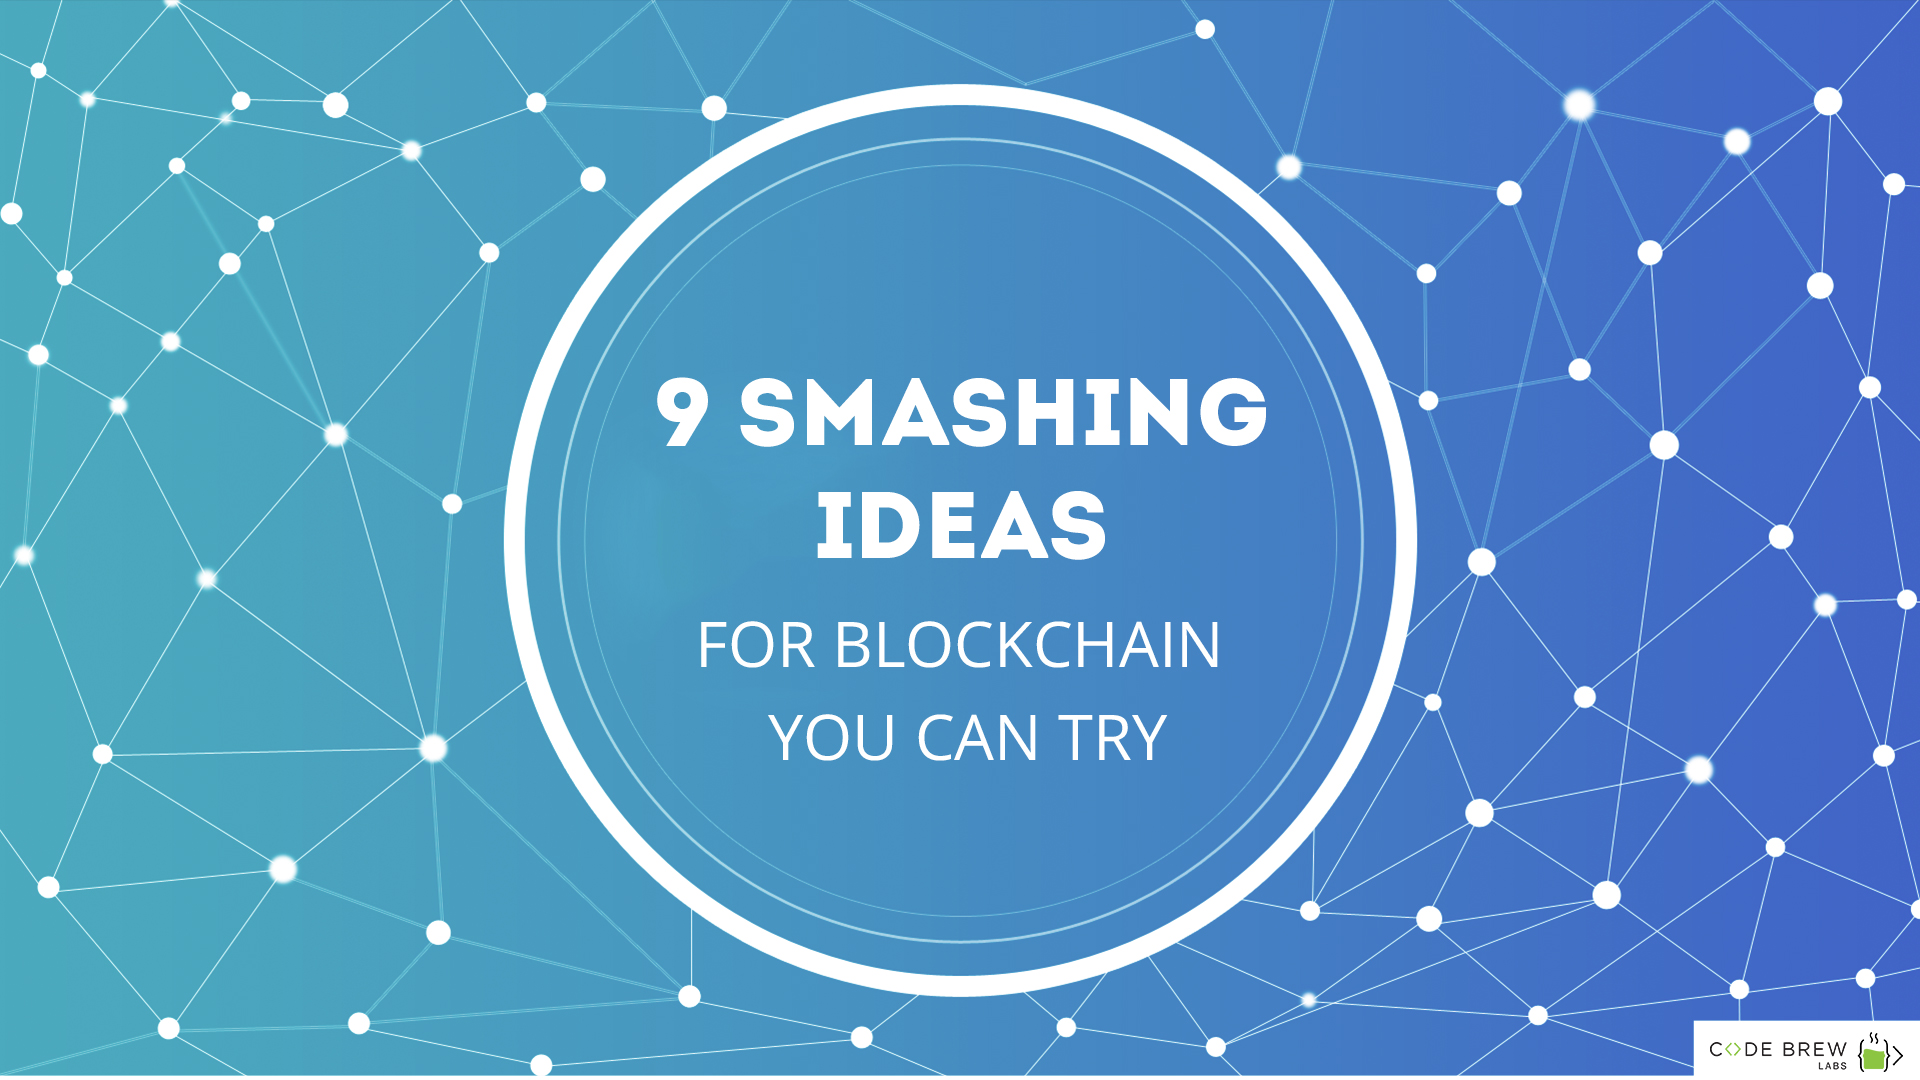 9 Smashing Ideas For Blockchain You Can Try